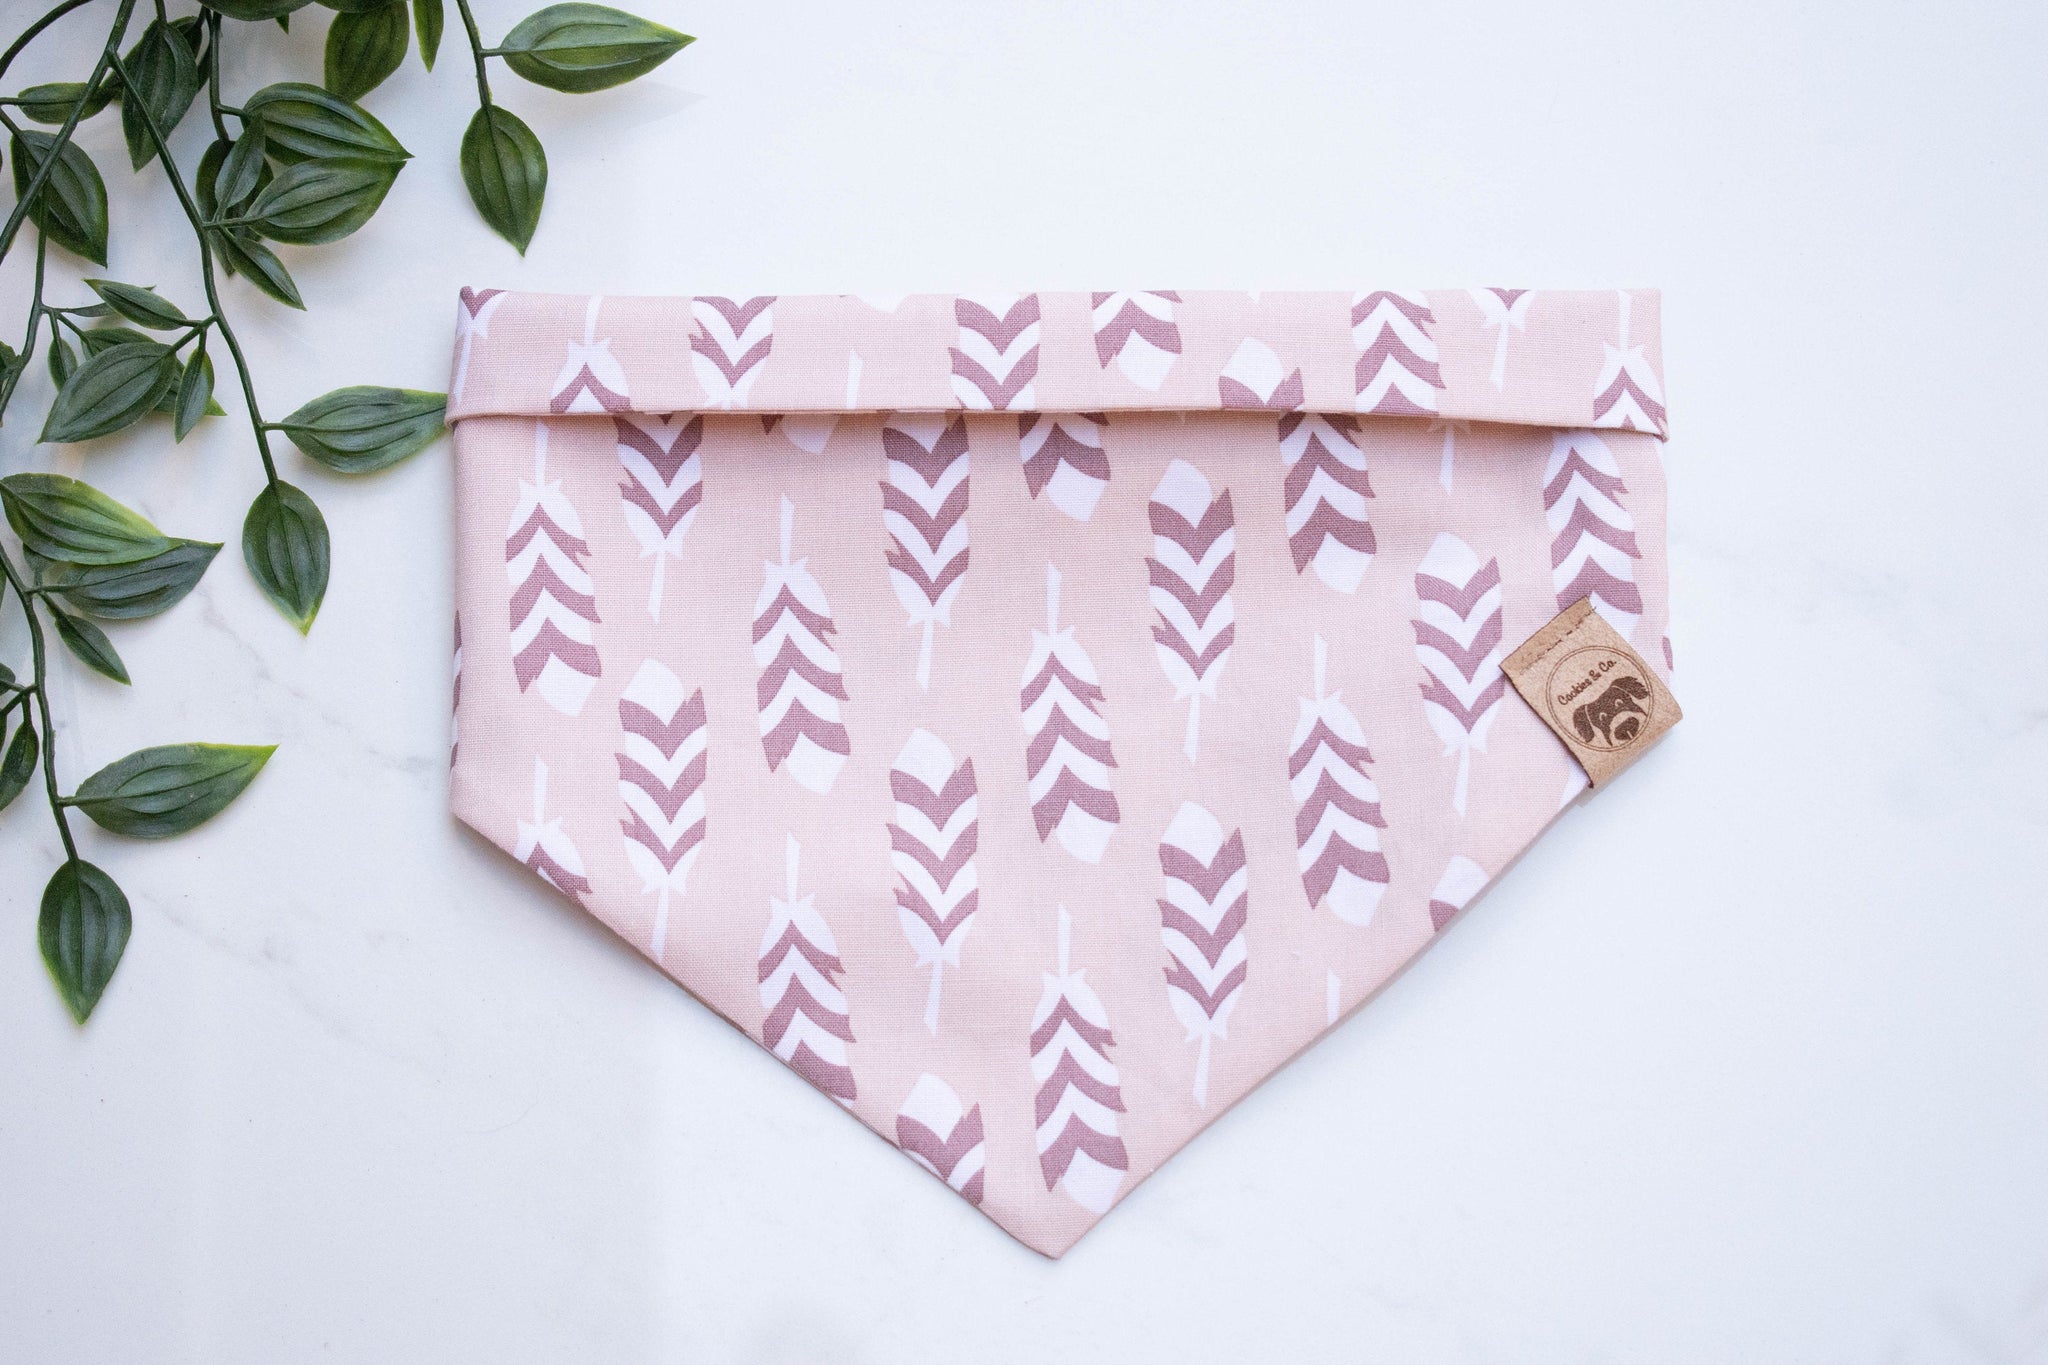 Feathers bandana print, featuring columns of white and brown feathers running different directions, on a light pink background